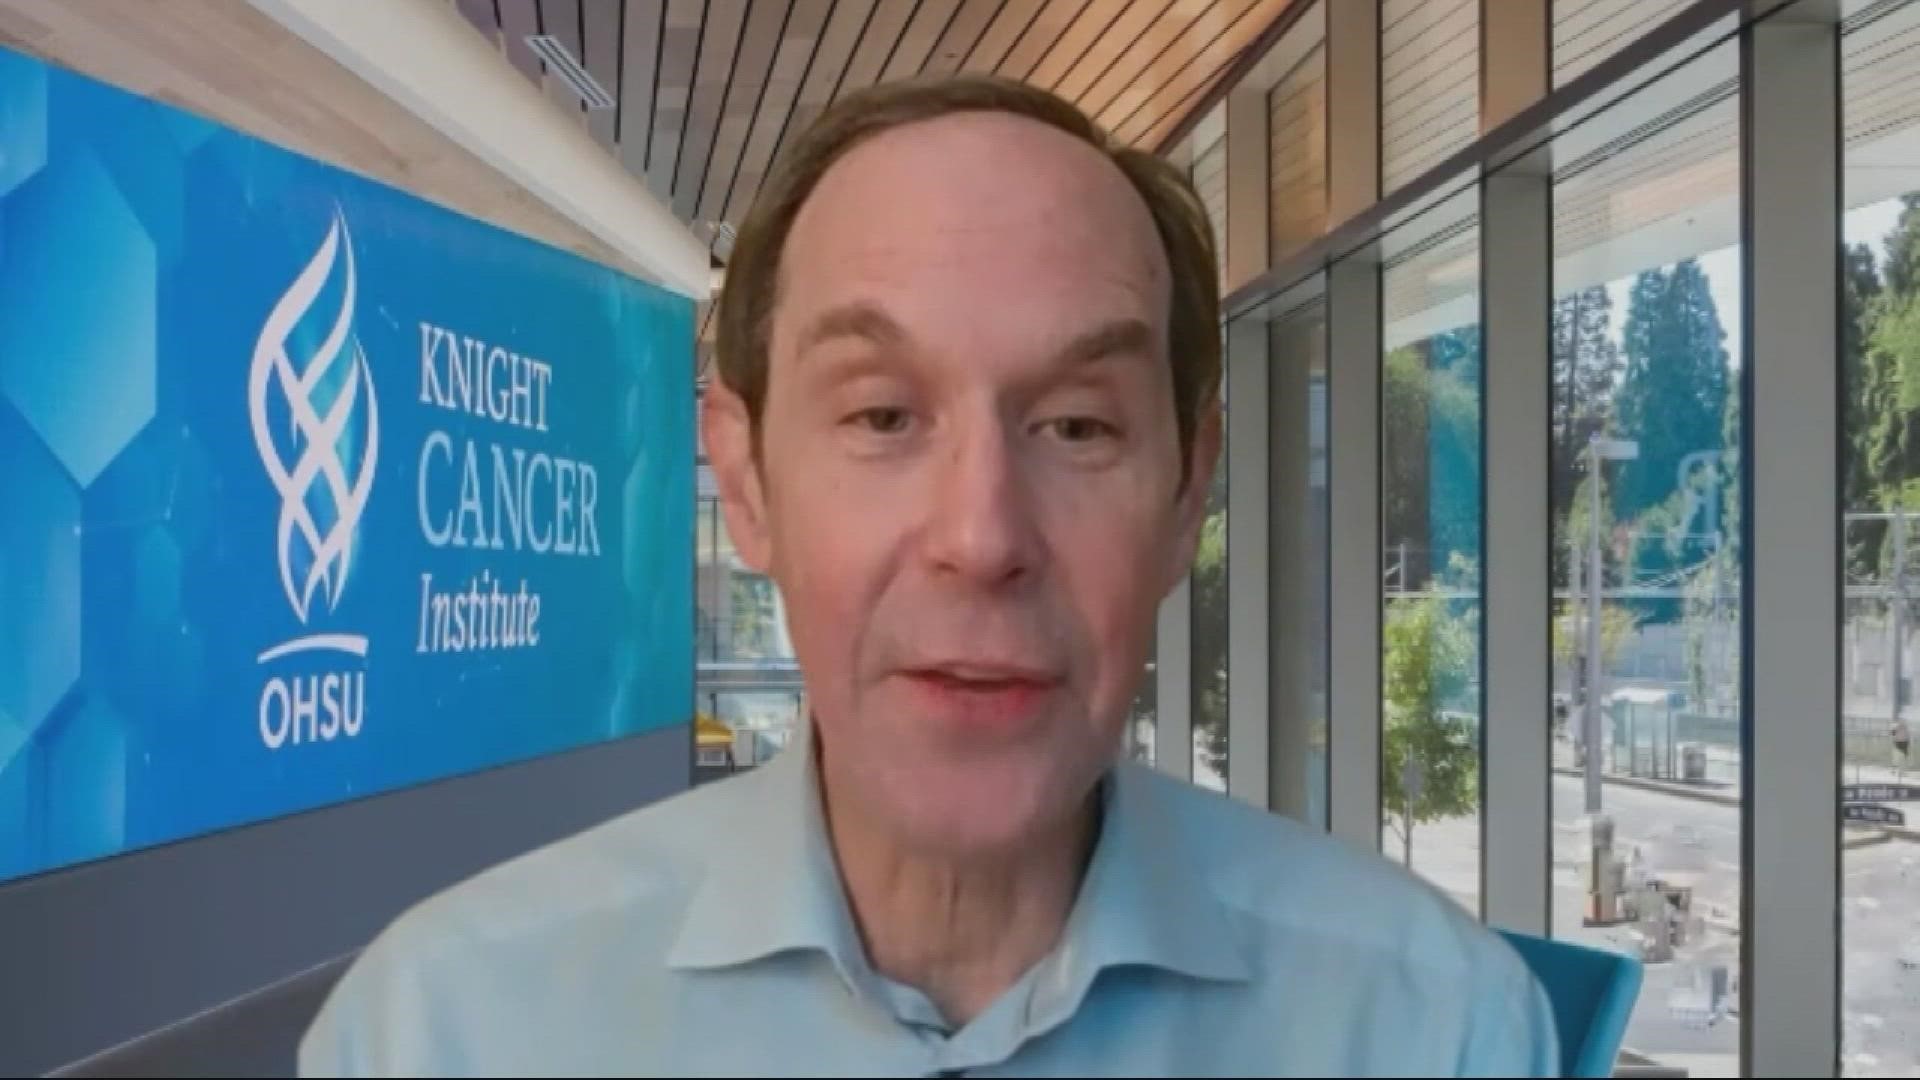 A leader in cancer research sat down with KGW to discuss the Moonshot.